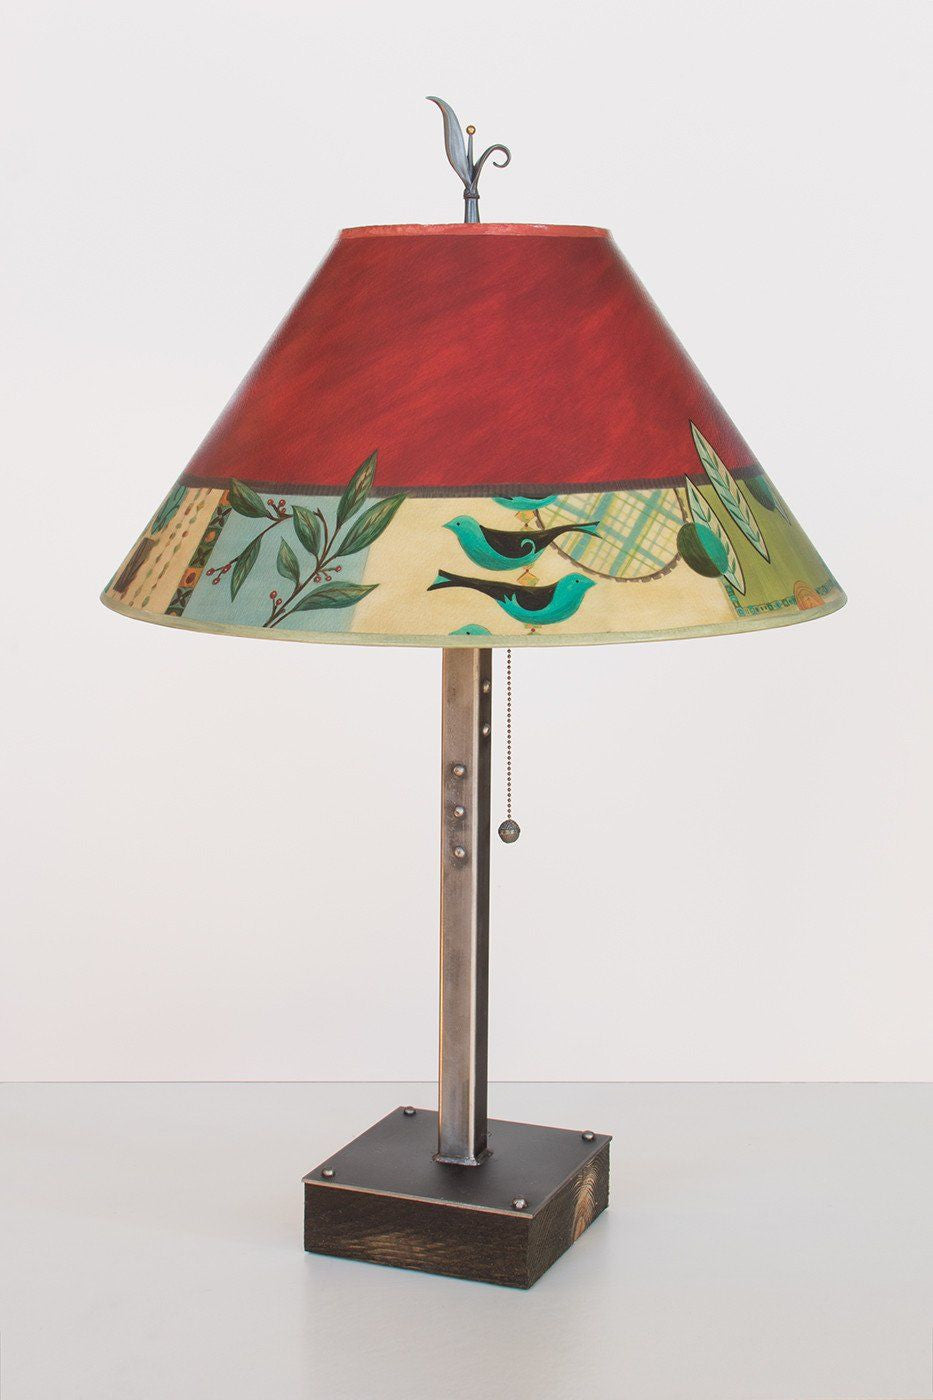 Janna Ugone &amp; Co Table Lamps Steel Table Lamp on Wood with Large Conical Shade in New Capri